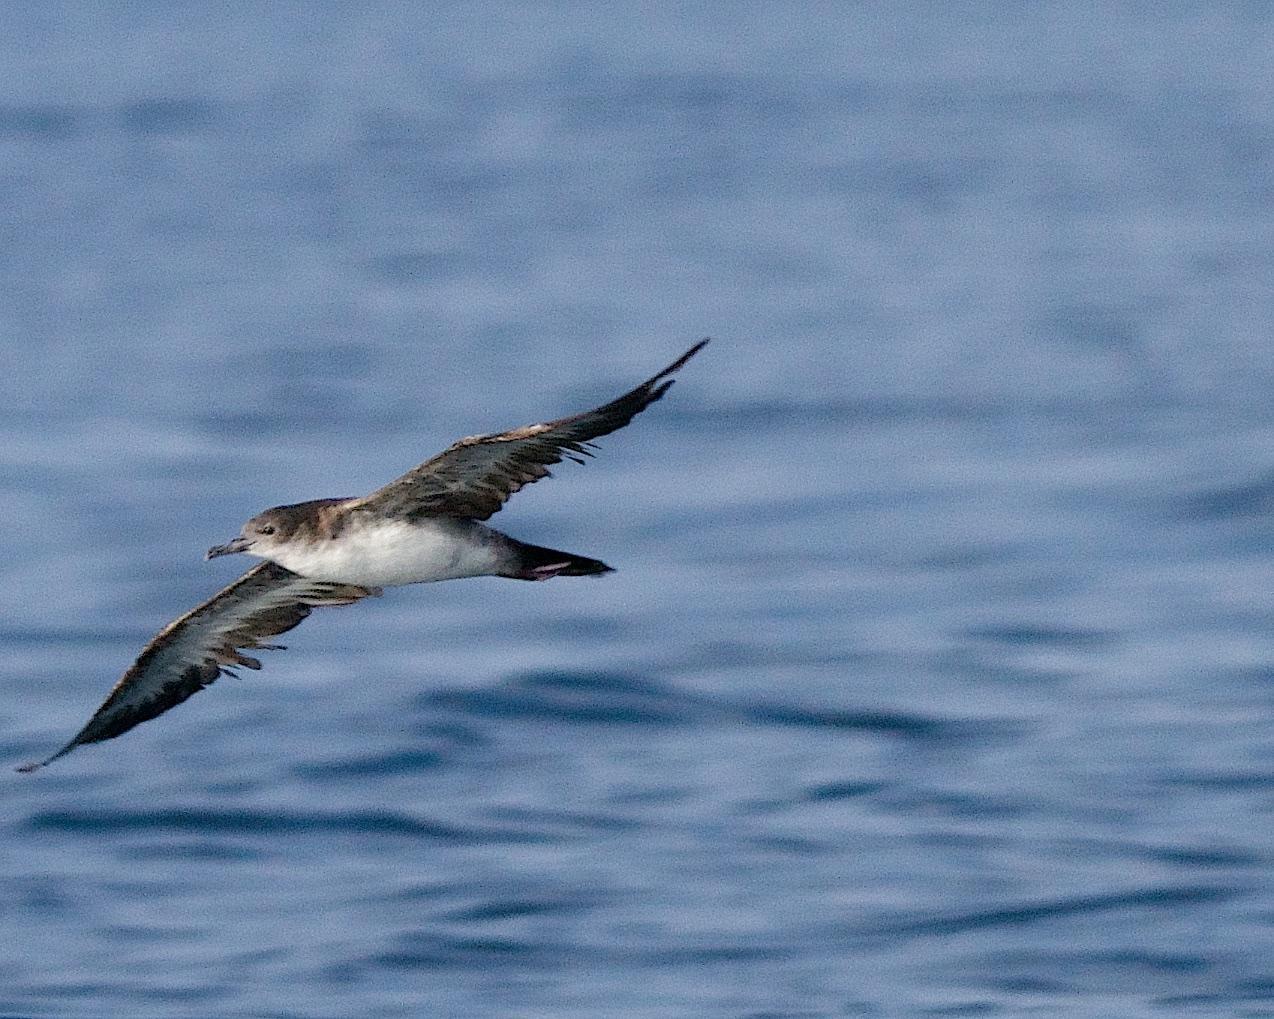 Wedge-tailed Shearwater Photo by Gerald Hoekstra